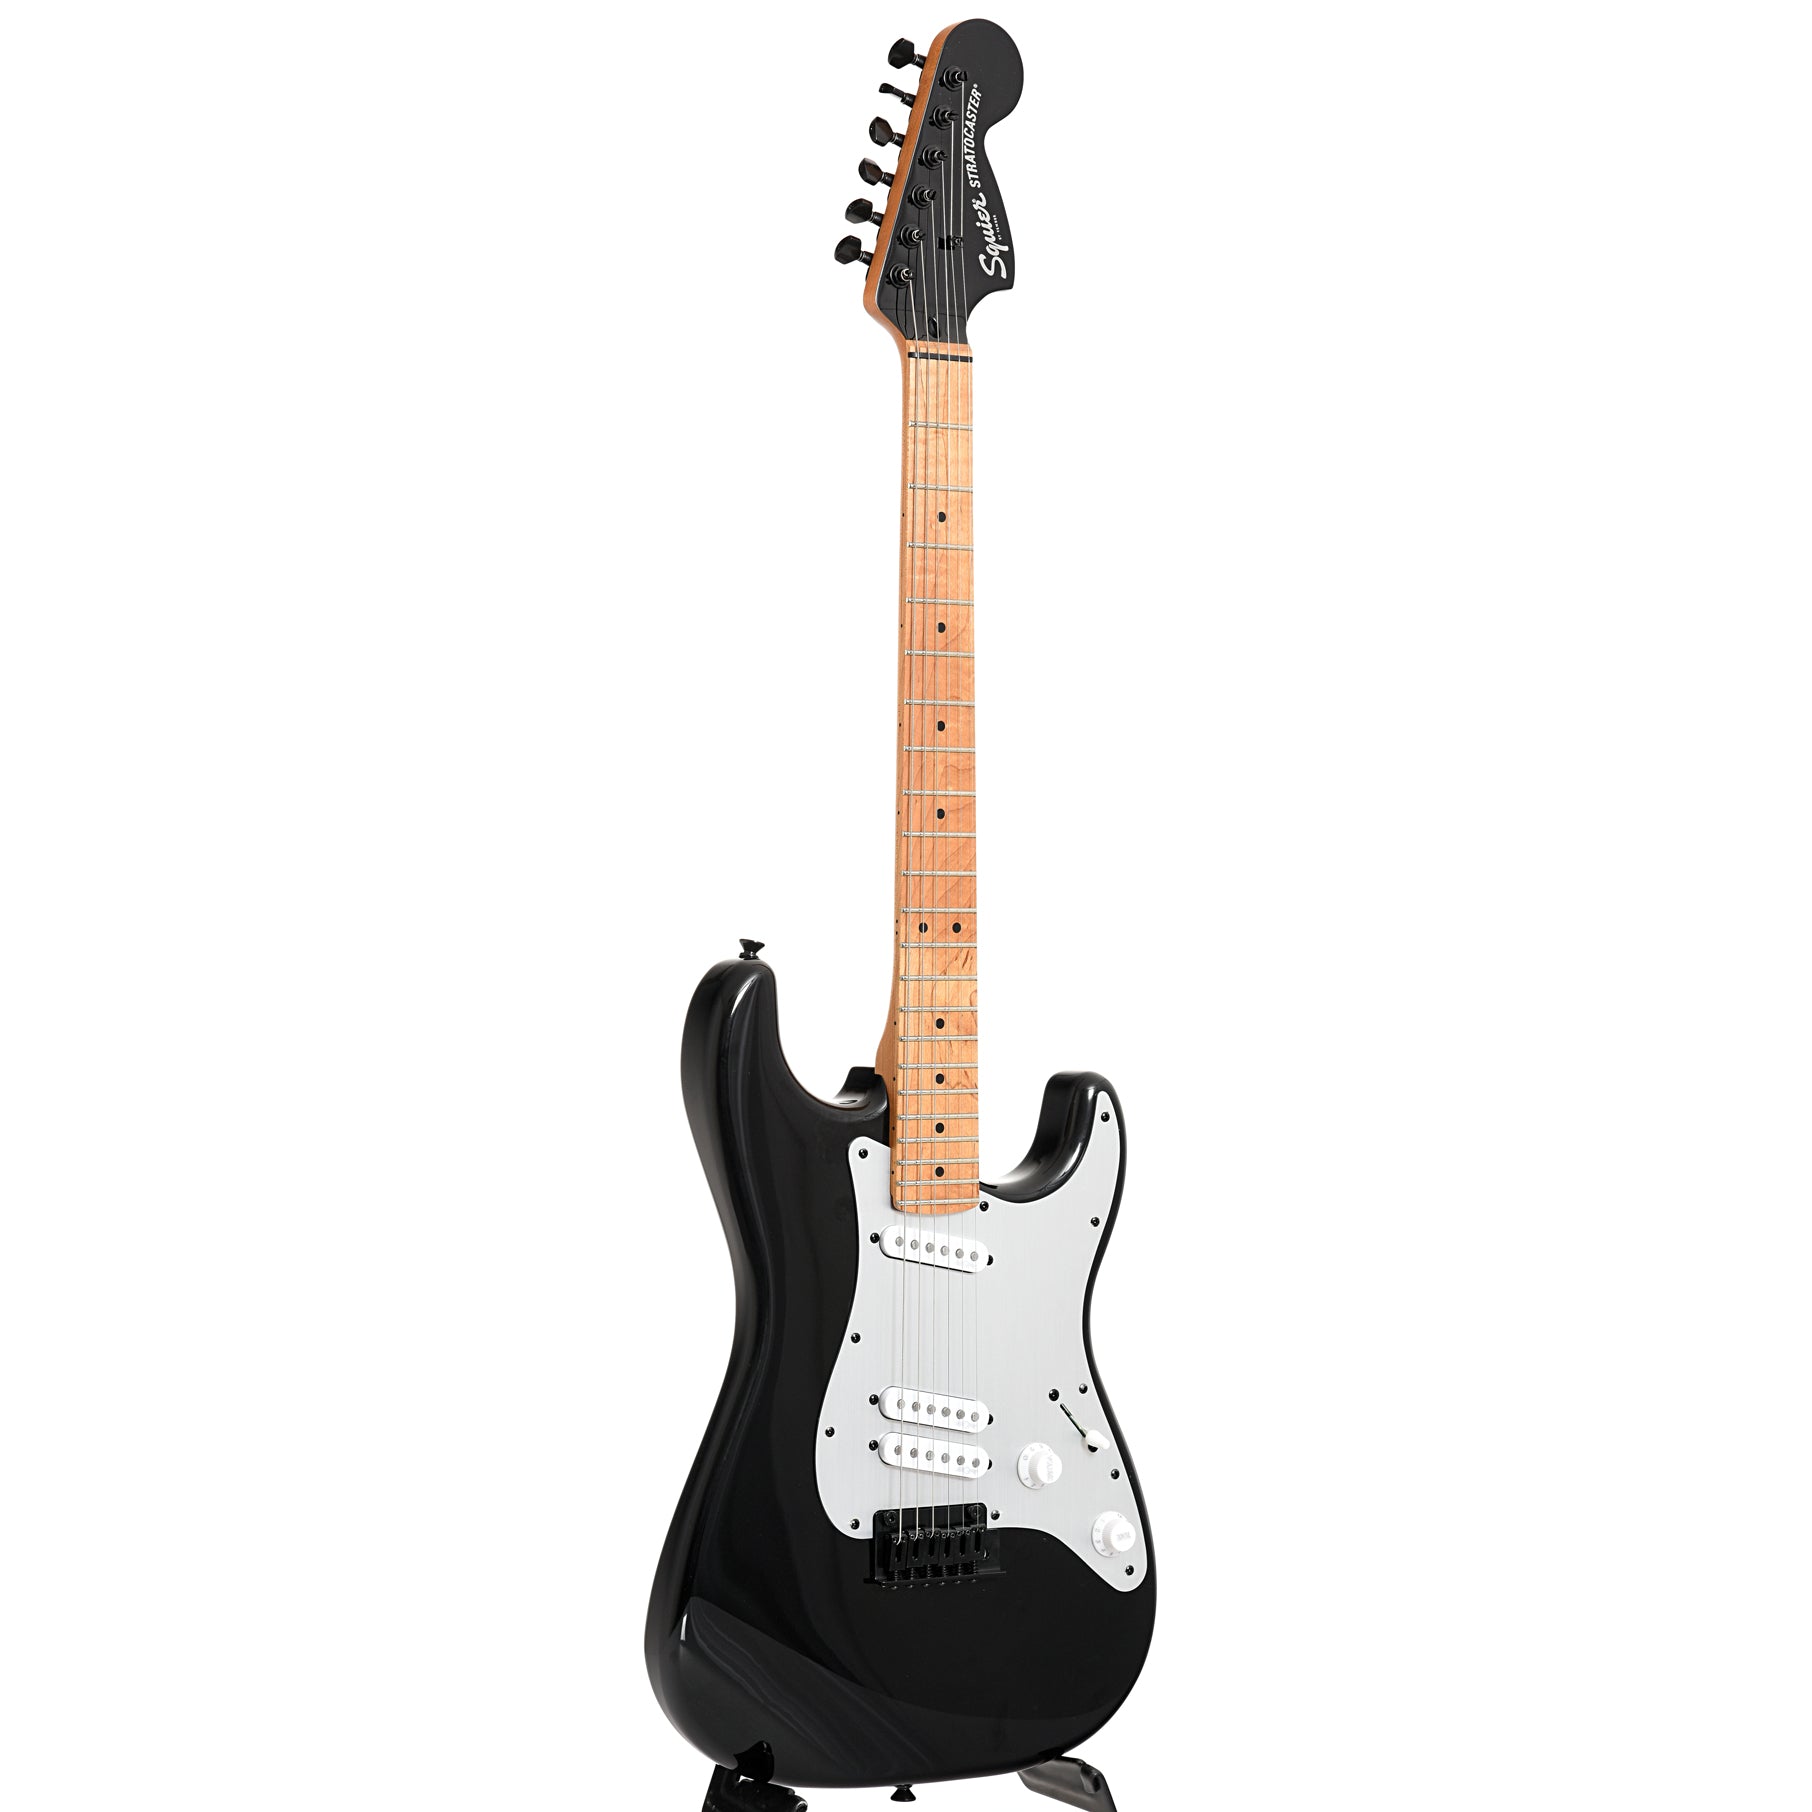 Image 11 of Squier Contemporary Stratocaster Special, Black - SKU# SCSSB : Product Type Solid Body Electric Guitars : Elderly Instruments